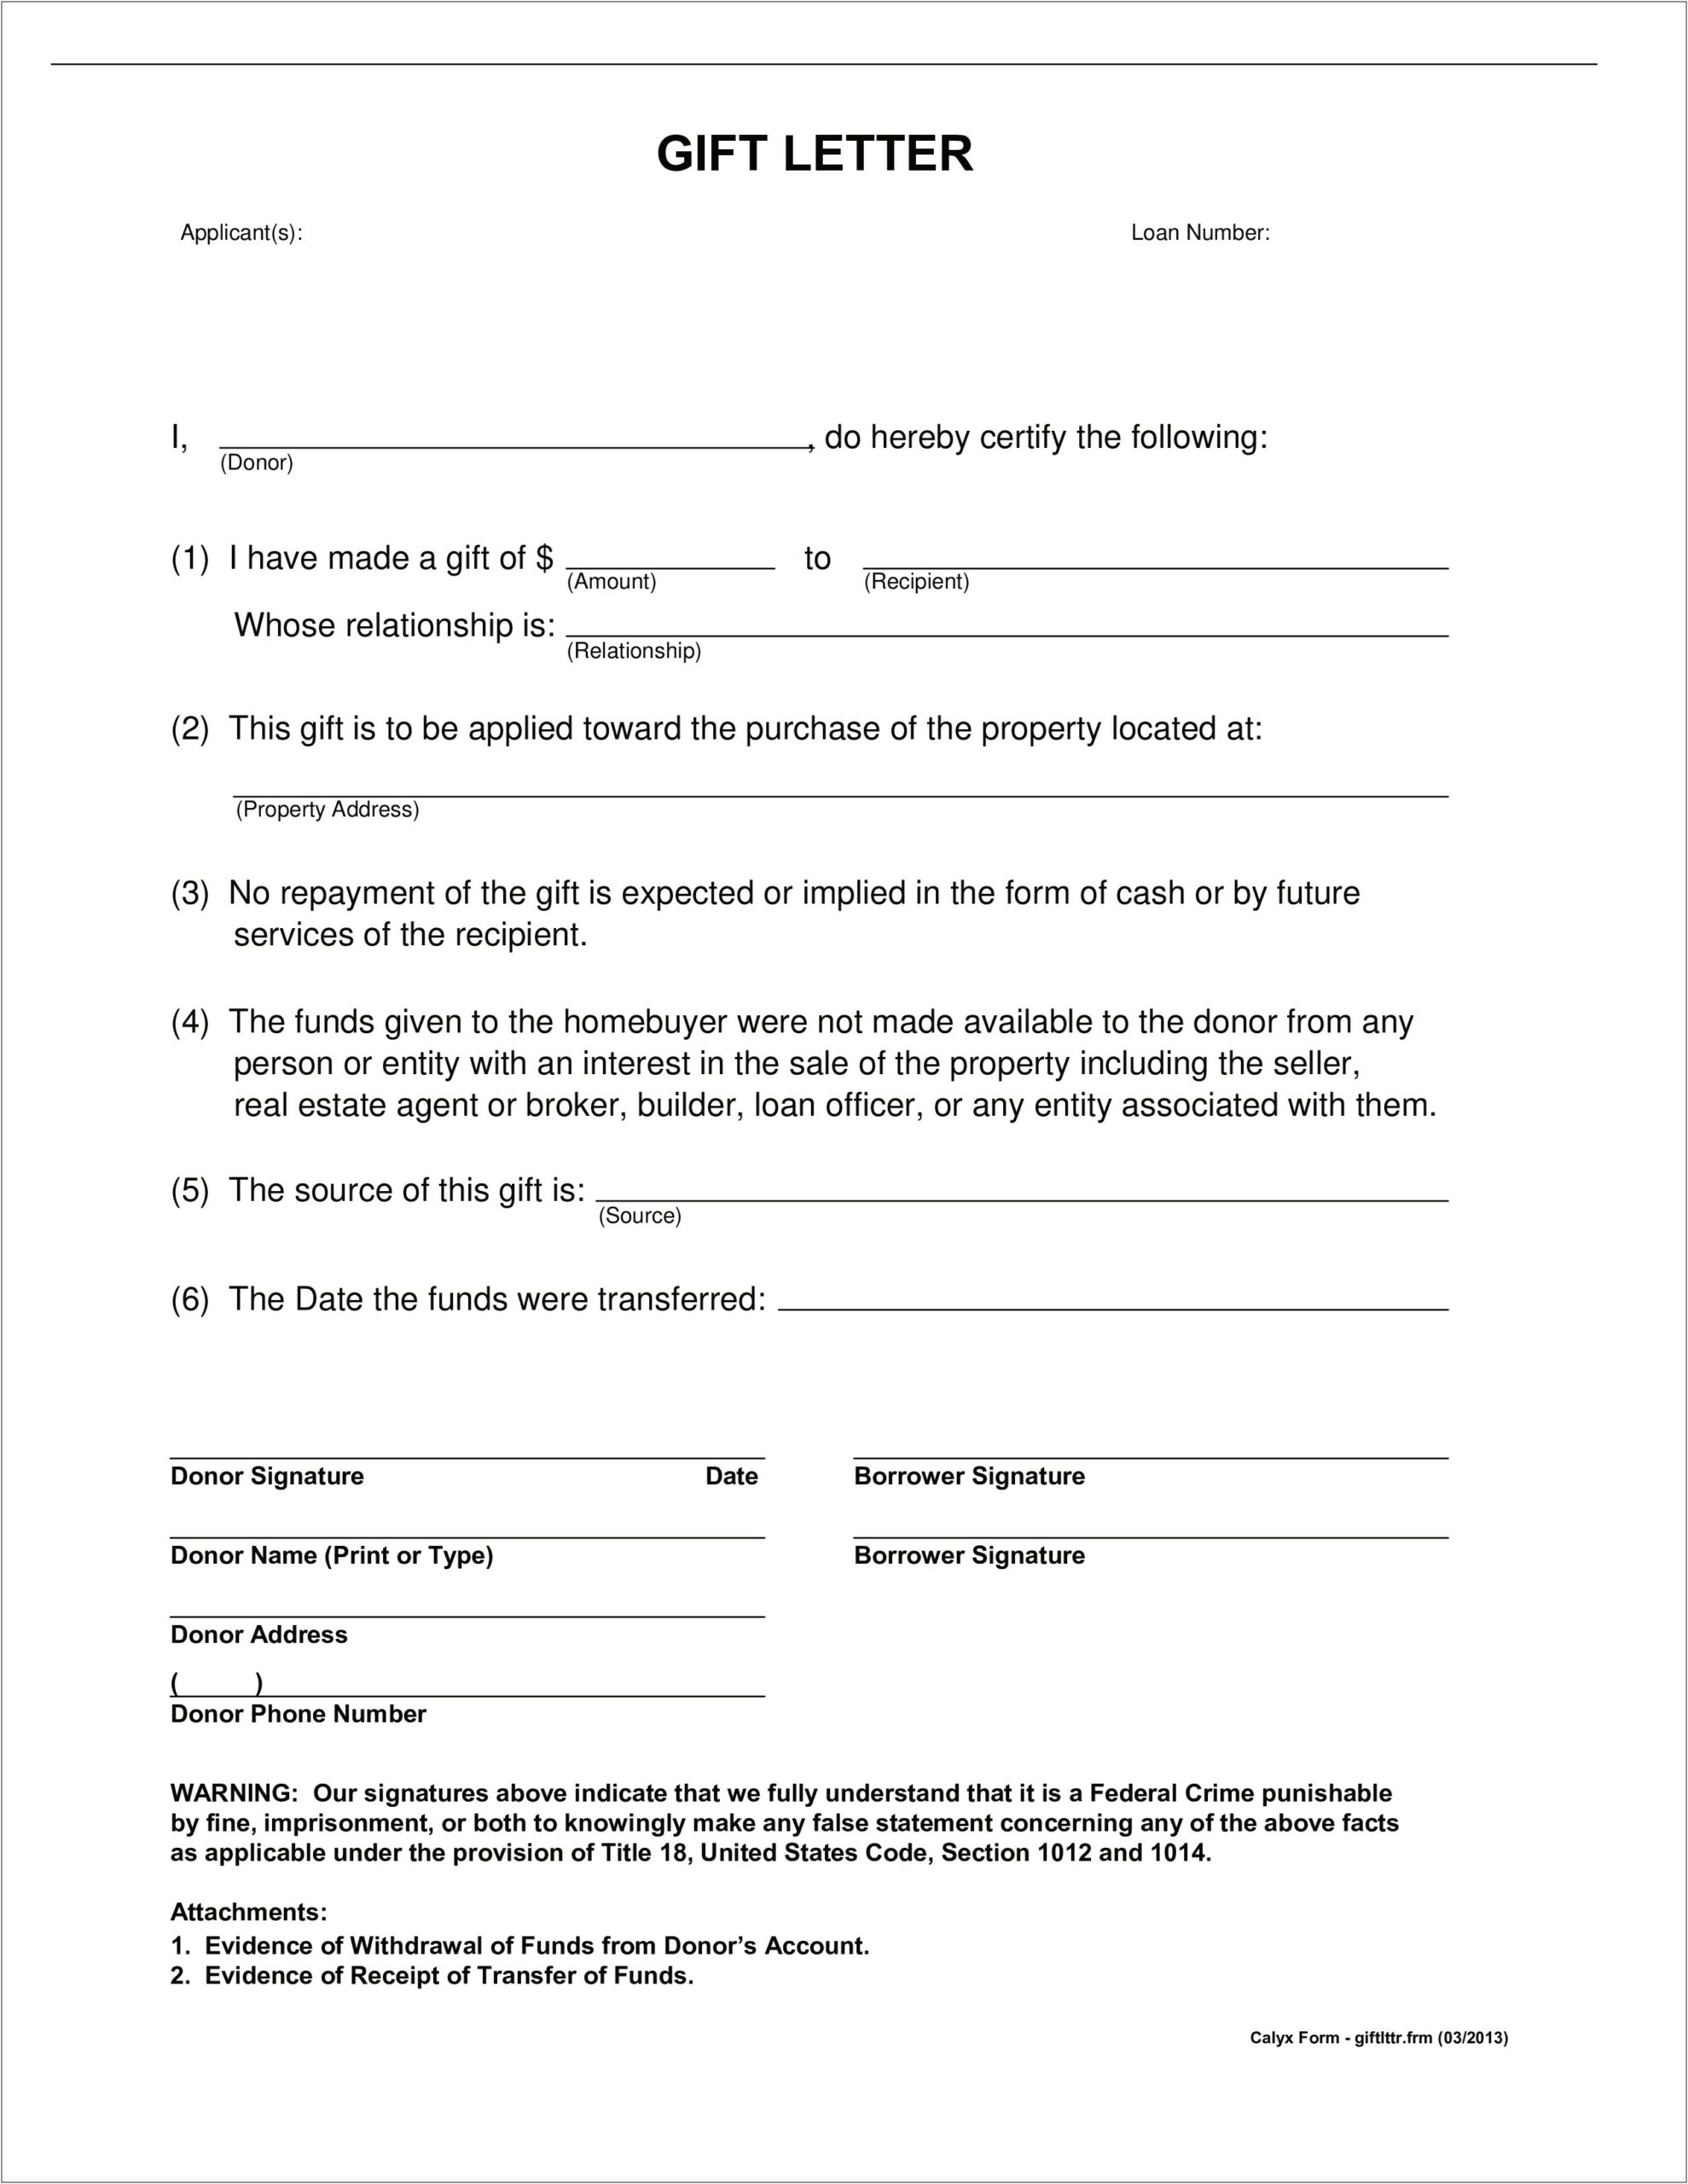 An Individual Raising Money Letter Template